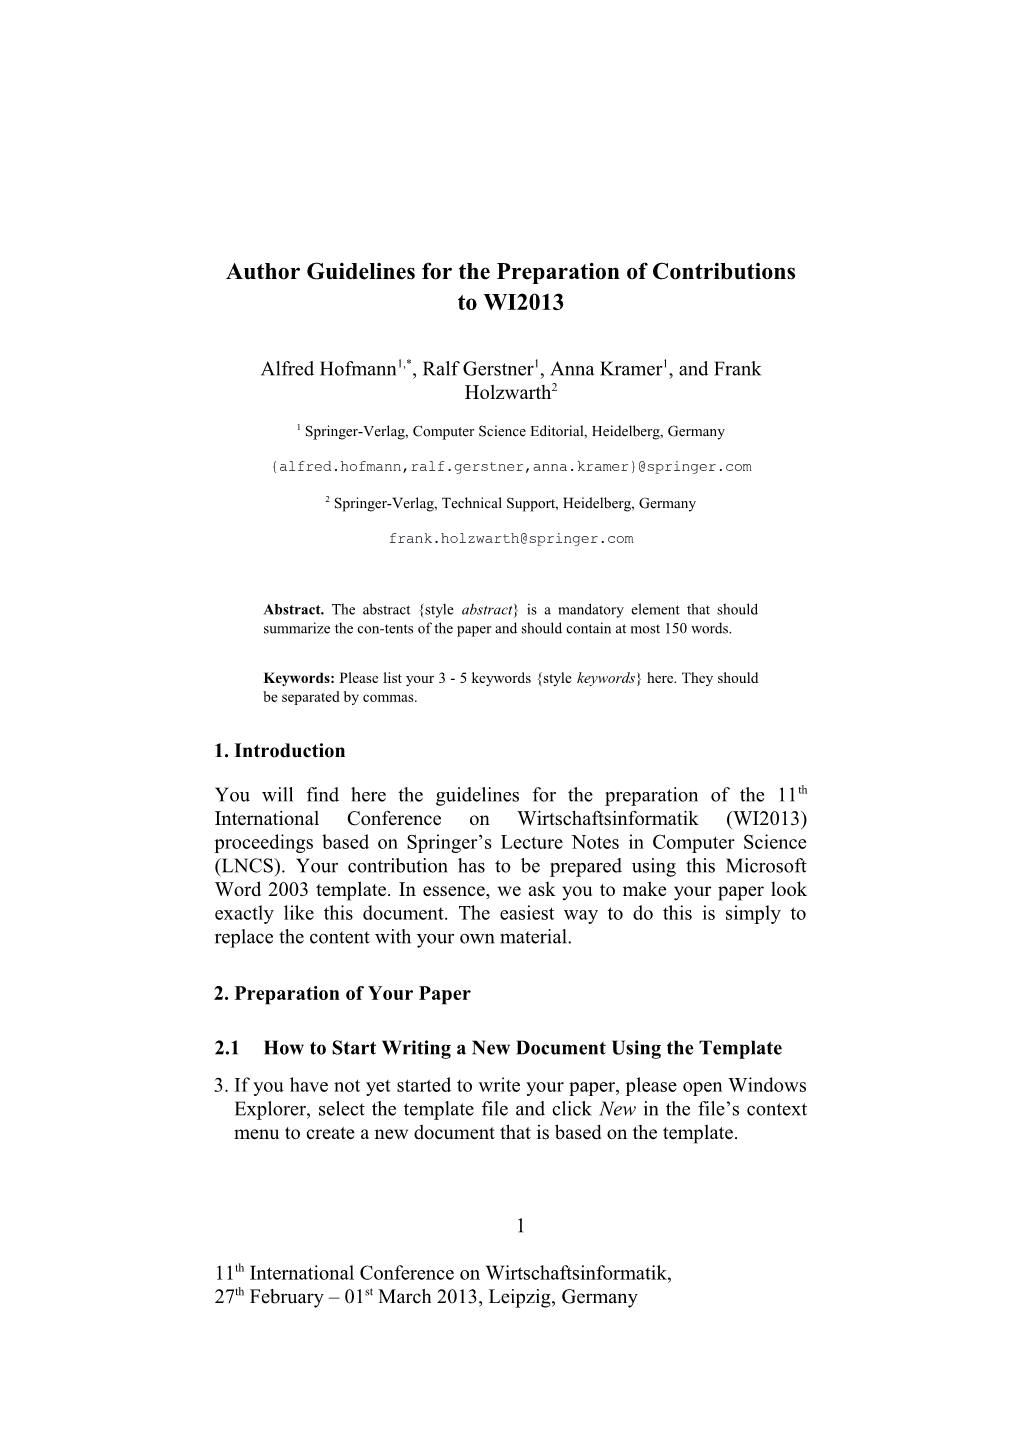 Author Guidelines for the Preparation of Contributions to WI2013